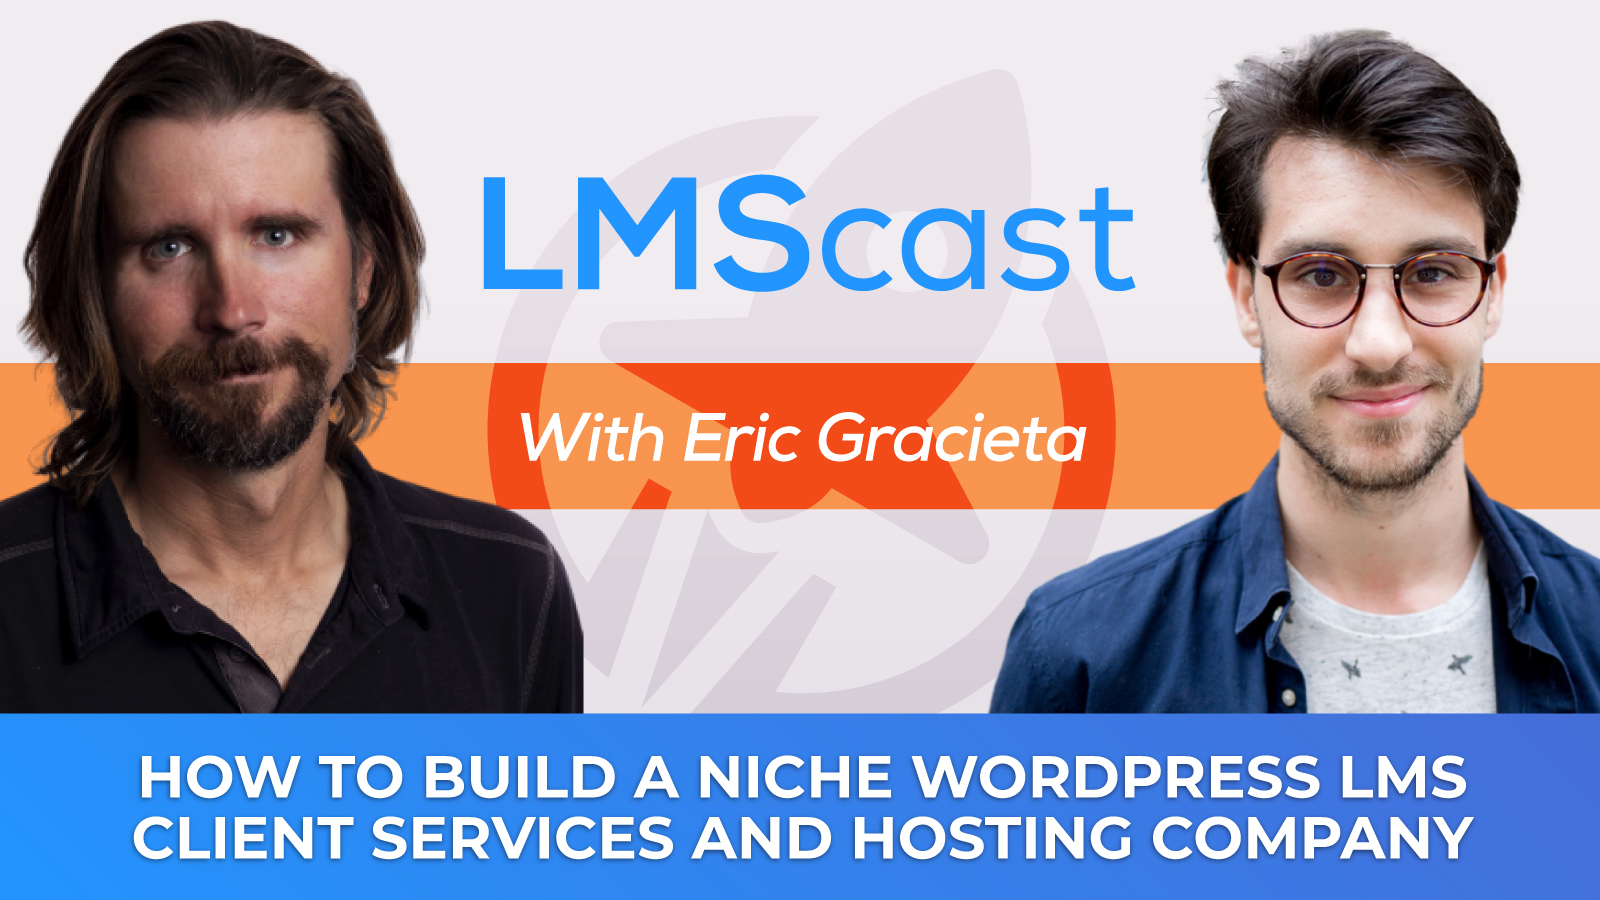 How to Build a Niche WordPress LMS Client Services and Hosting Company with Eric Gracieta